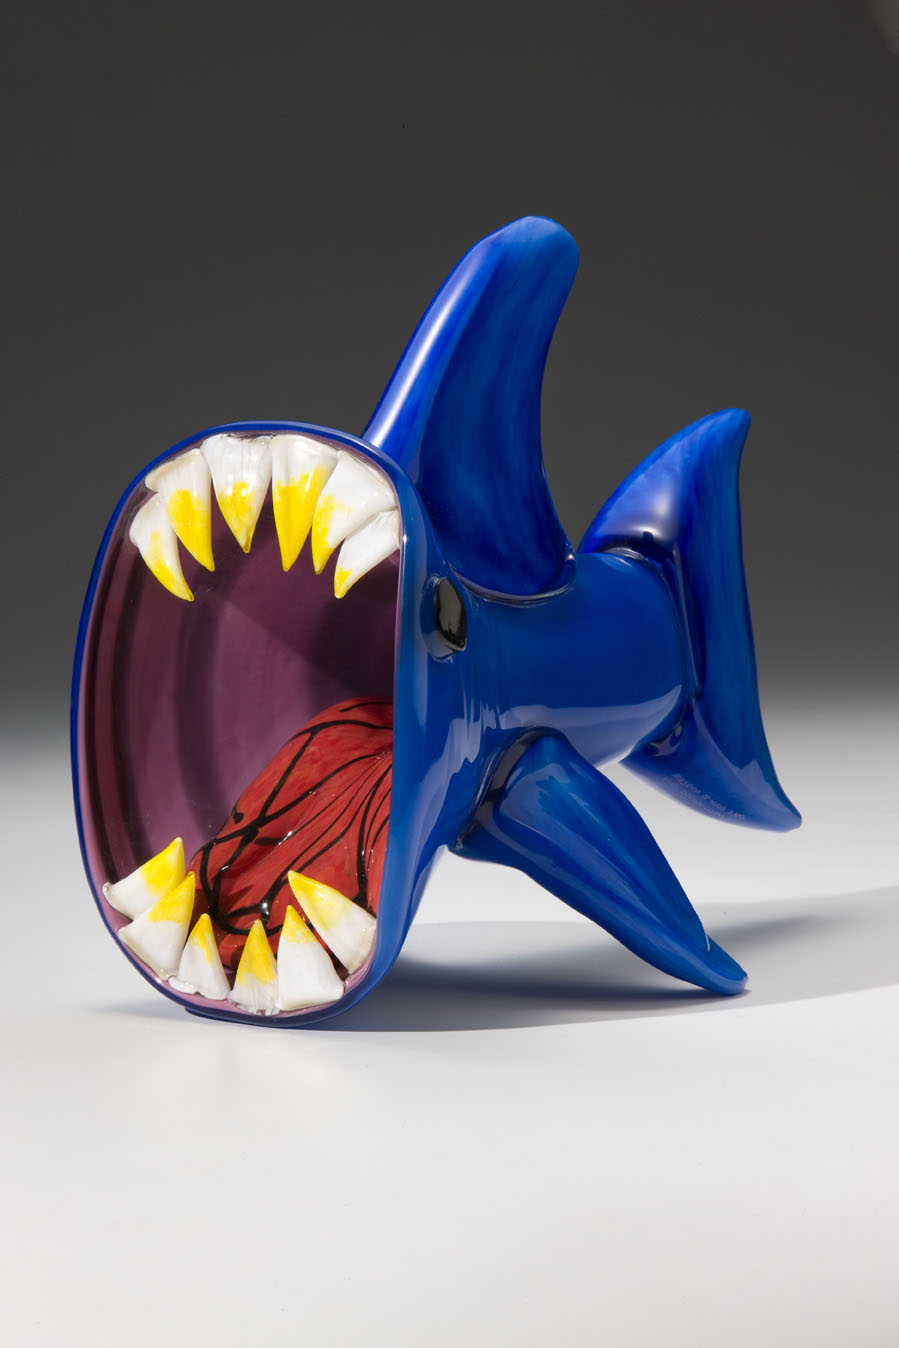  Designed by Erica Hankins (age 8), made by Museum of Glass Hot Shop Team.&nbsp; Shark Attack!,  2007.&nbsp;Blown and hot-sculpted glass;&nbsp;11 x 9 x 13 1/2 in.&nbsp;Collection of Museum of Glass, Tacoma, Washington, sponsored by Joseph N. Walter a